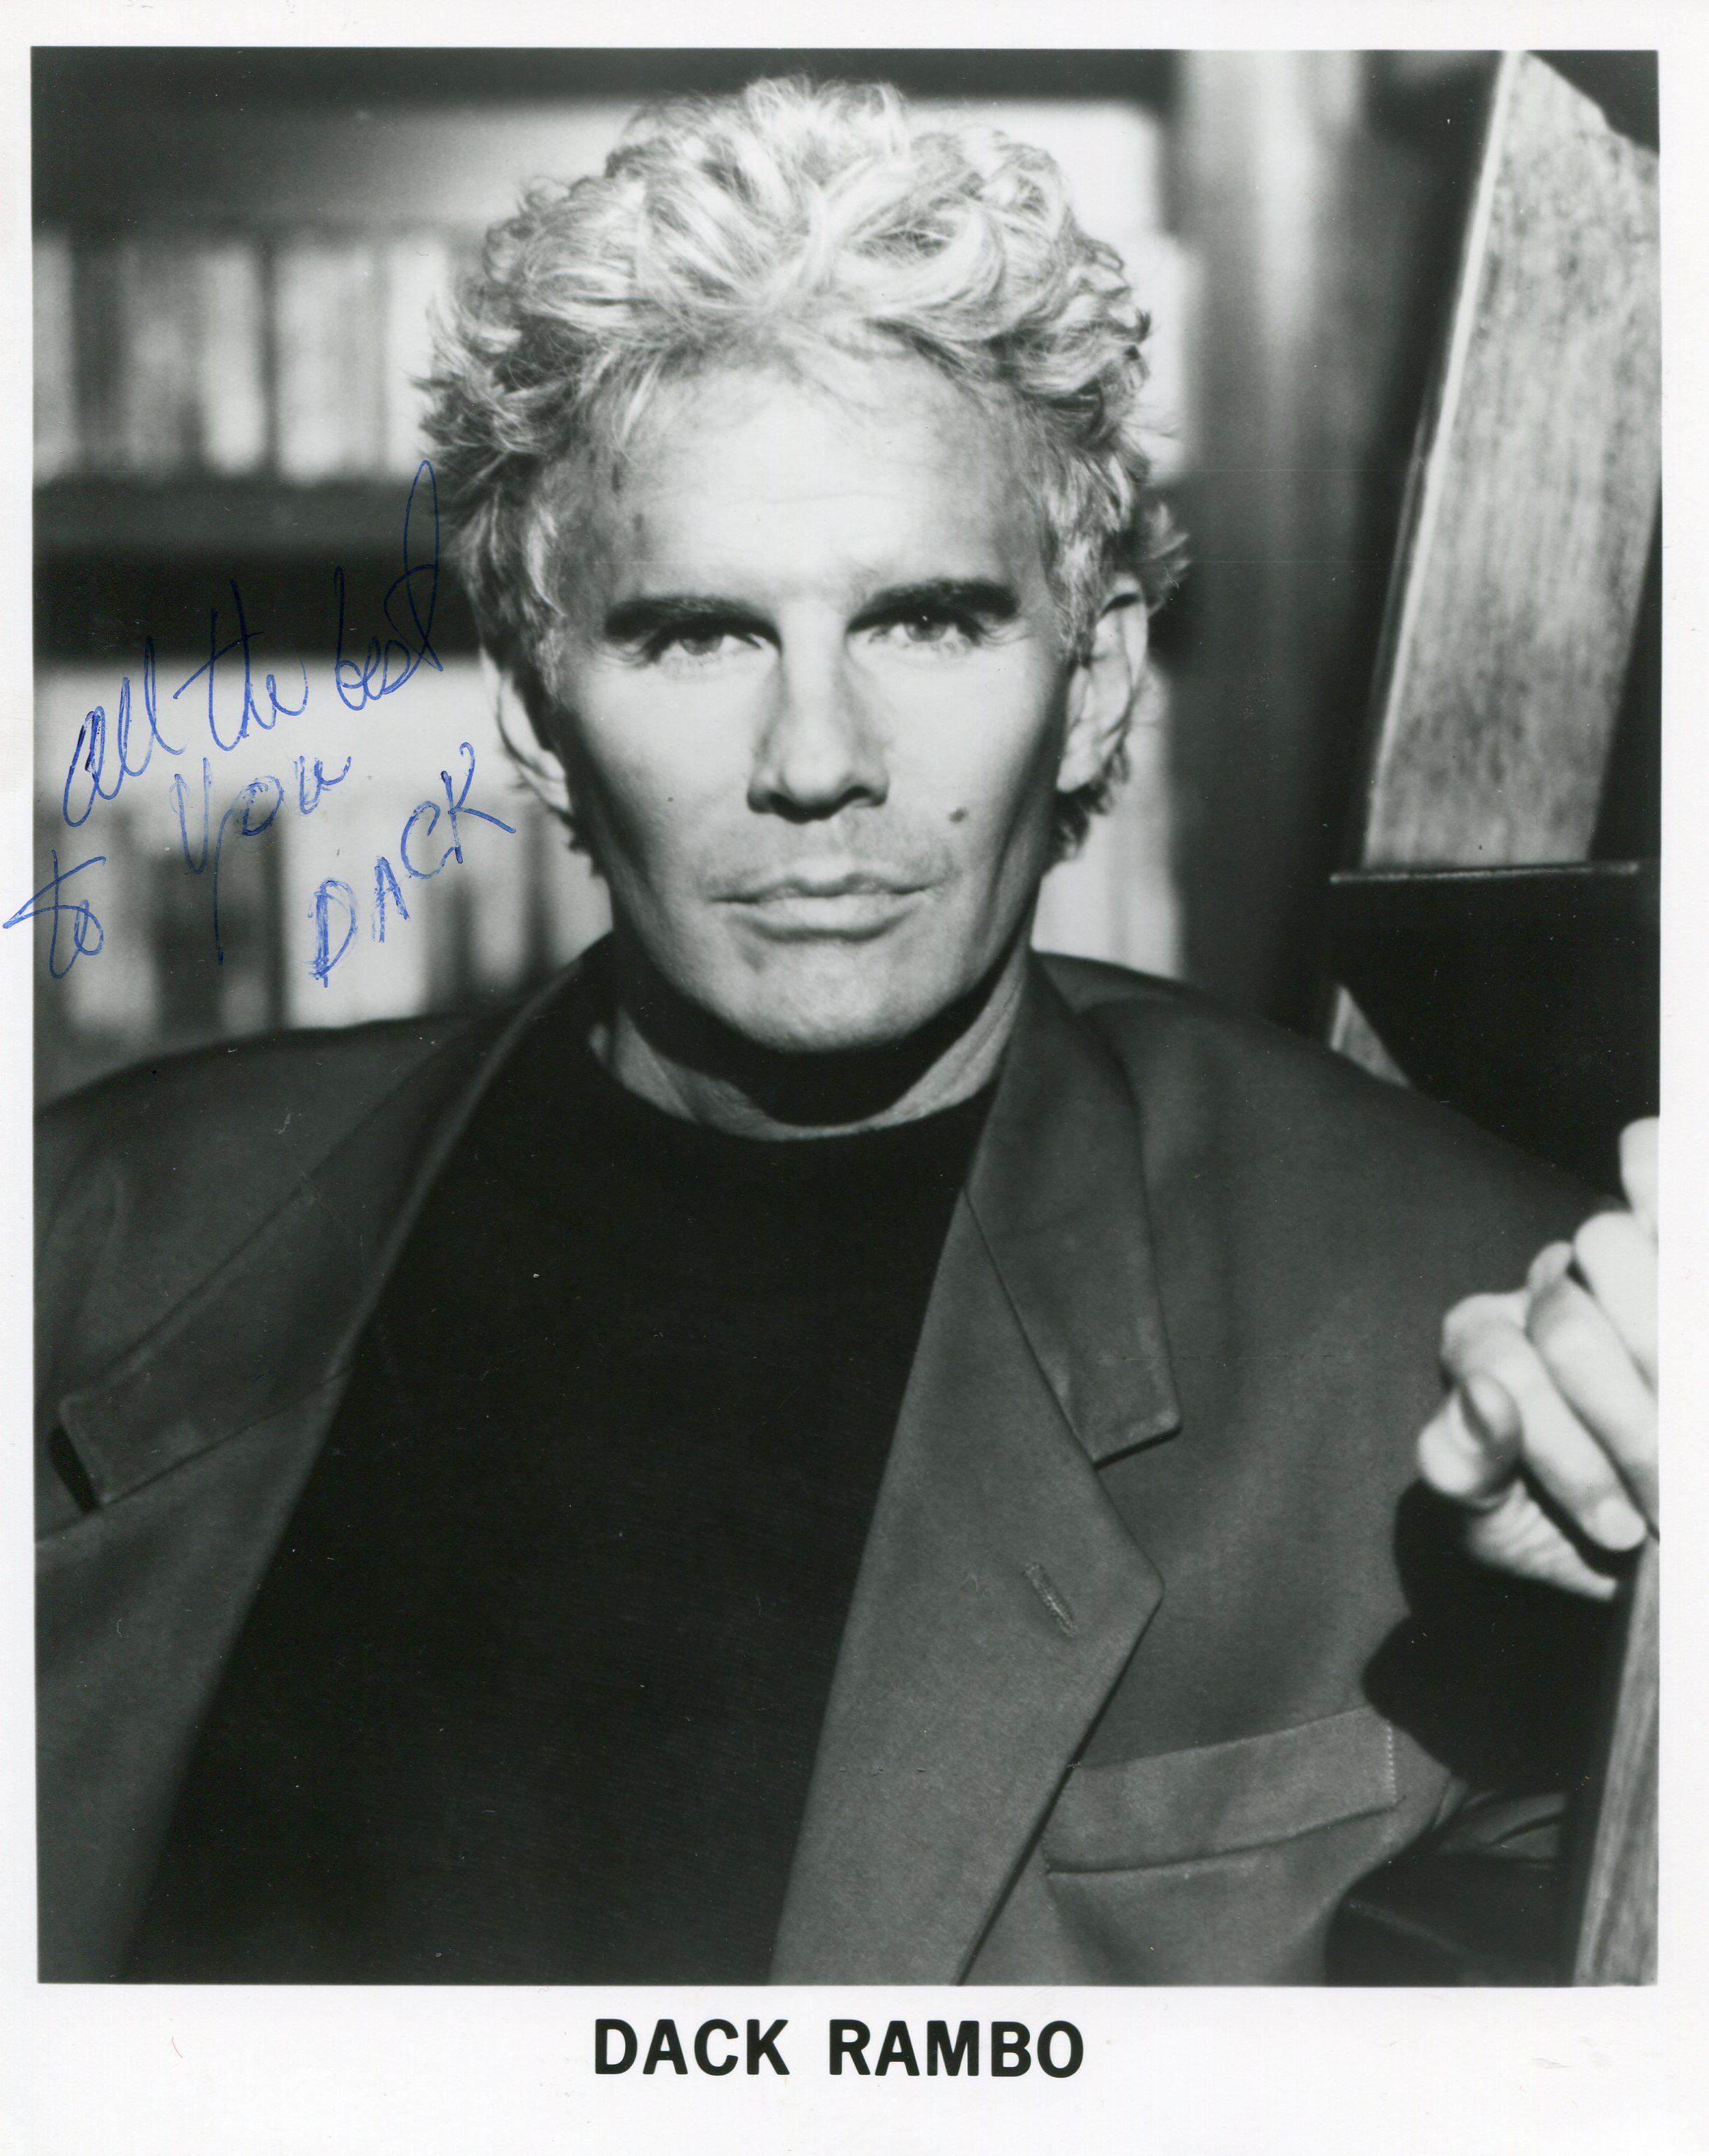 Dack Rambo – Movies & Autographed Portraits Through The Decades